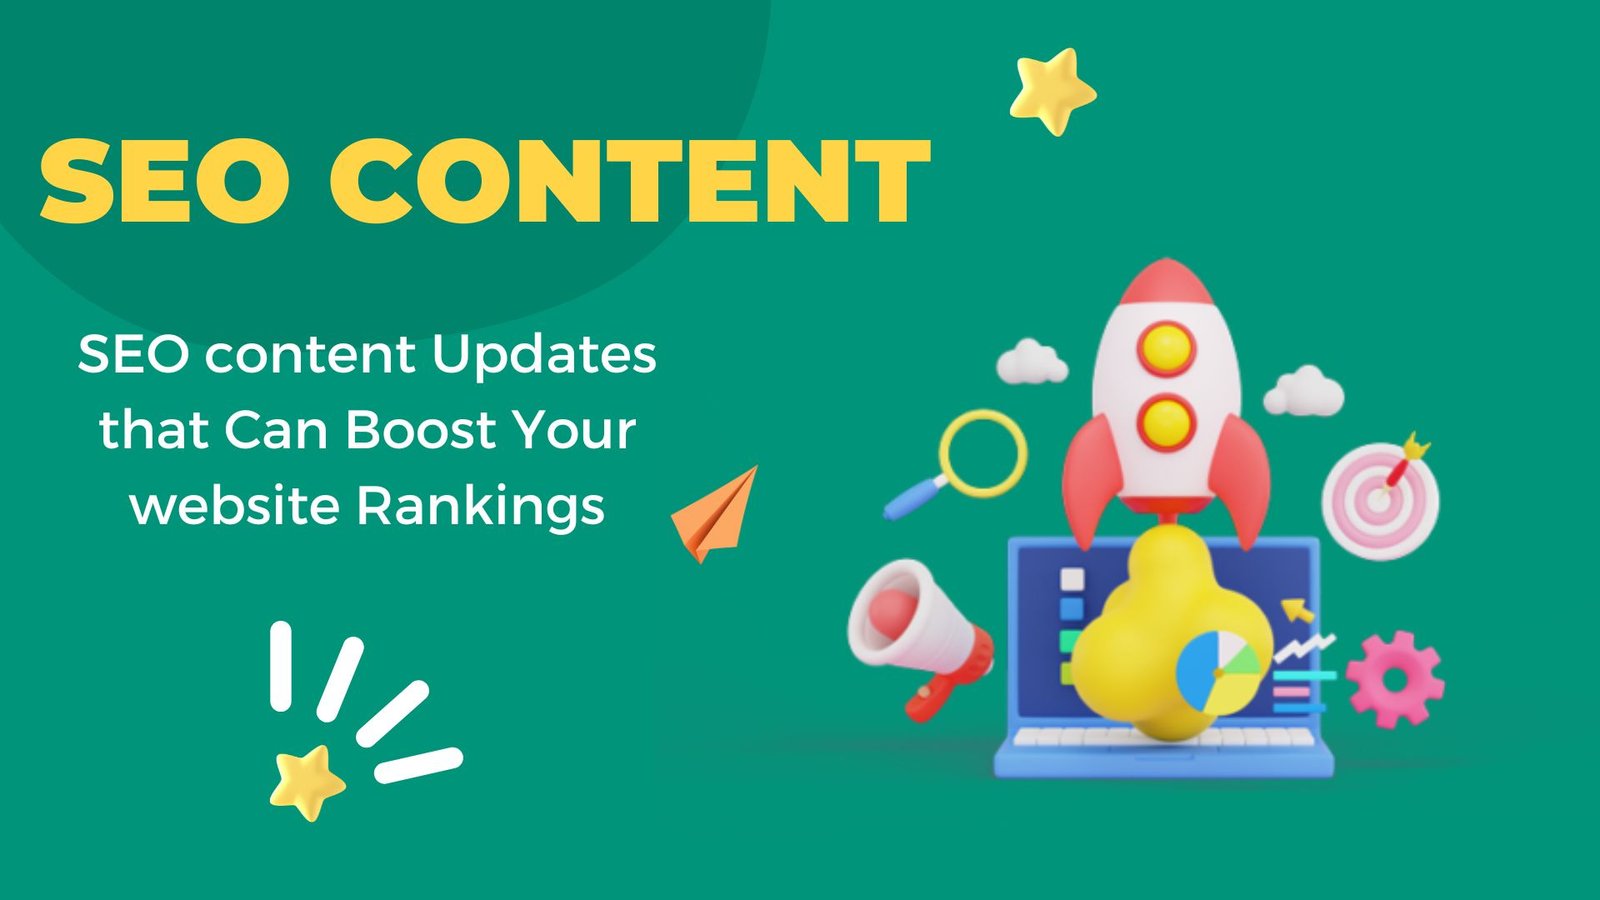 SEO content Updates that Can Boost Your website Rankings